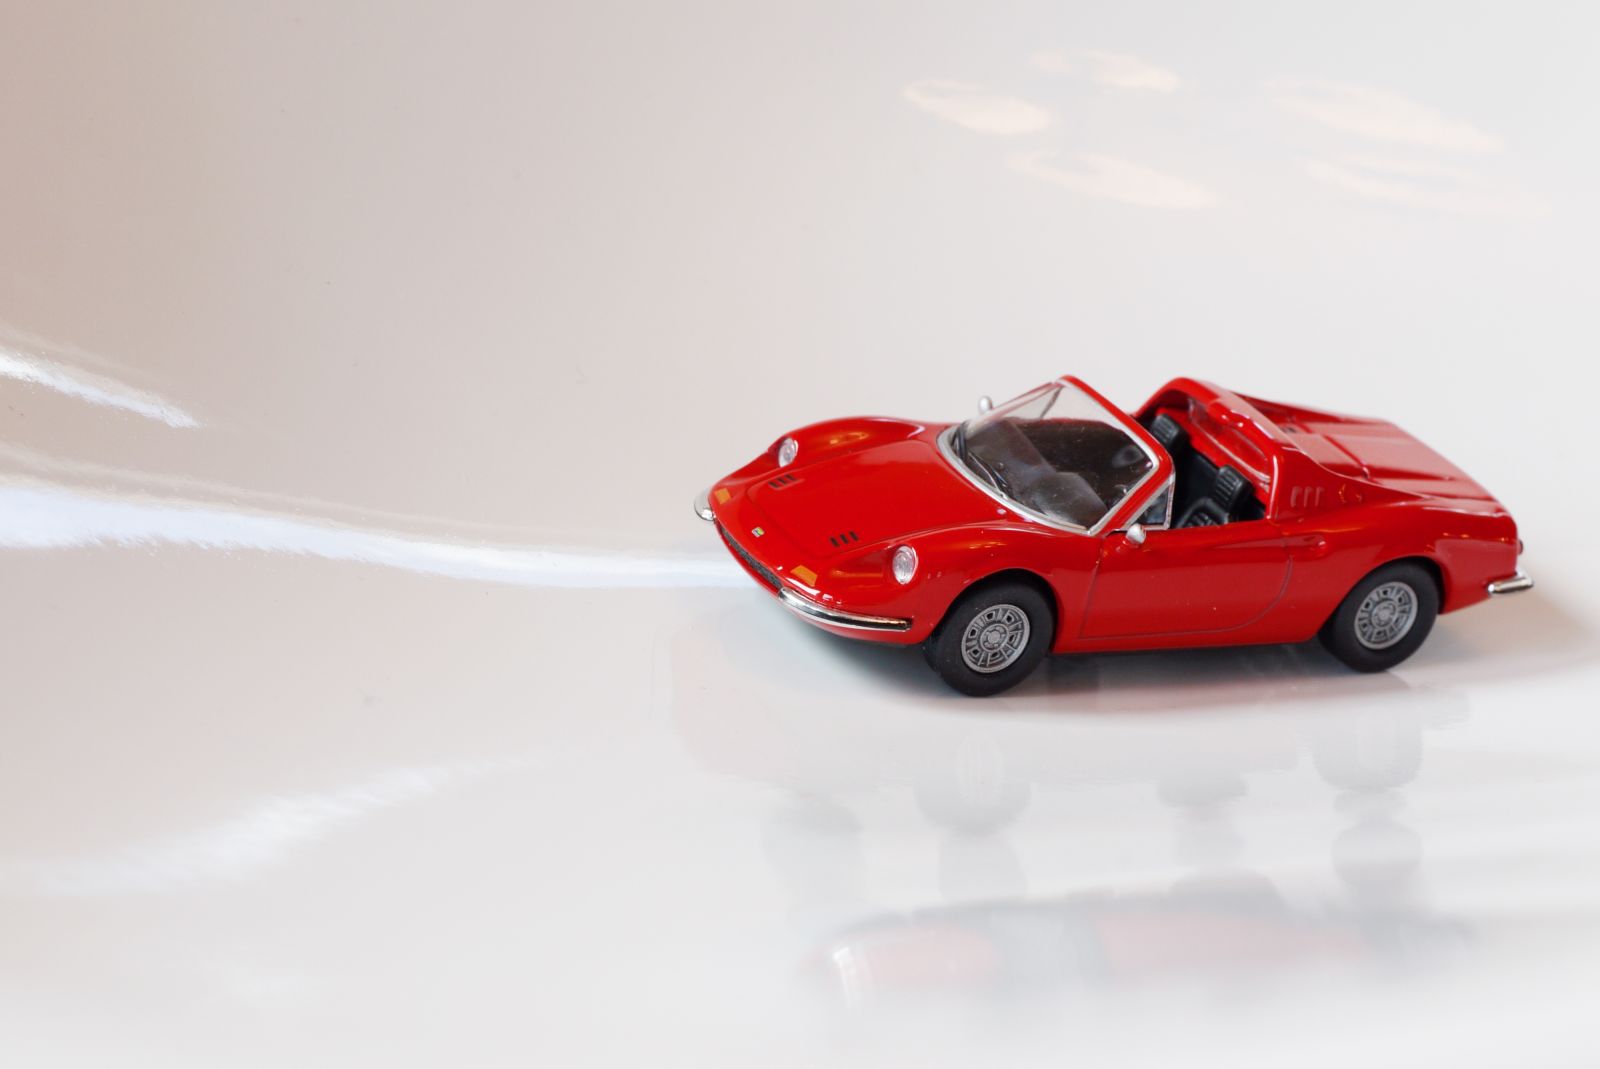 Illustration for article titled Kyosho Ferrari 4 1/64 #9 - Project Prancing Horse #10 - 1972 Dino 246 GTS